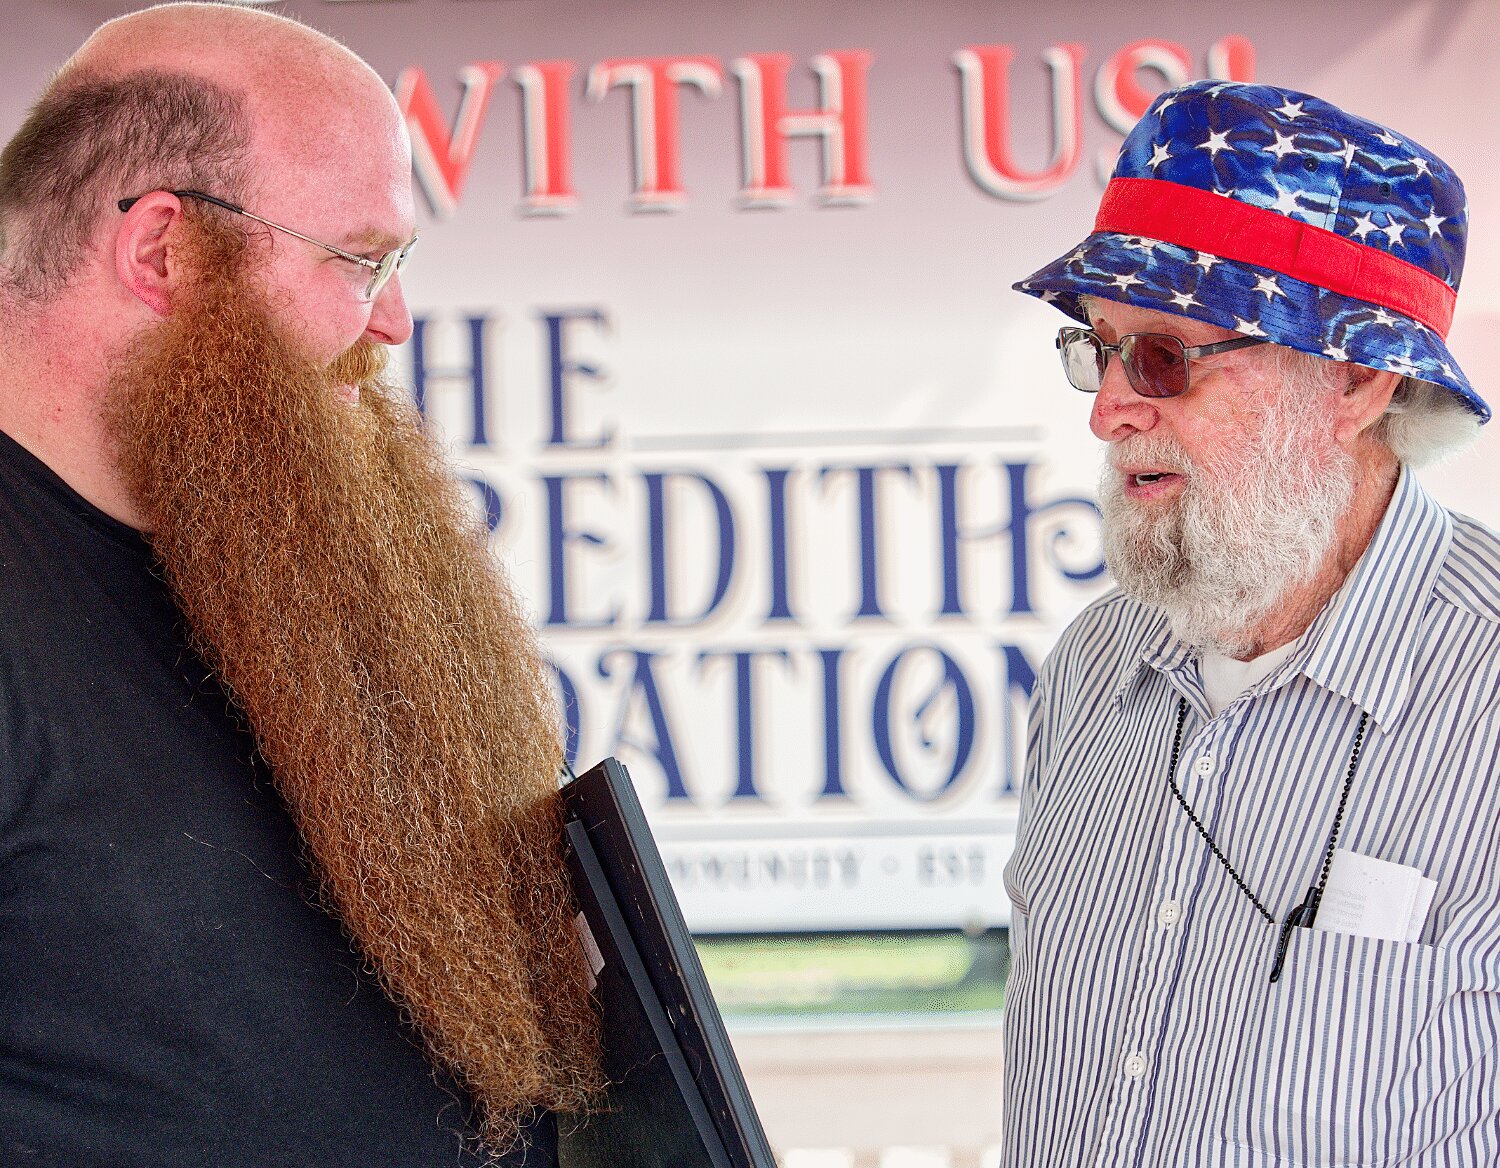 Joseph McCord received the prize for longest beard and overall judges choice in the beard masters competition from Sam Arrington, the winner of the contest held 50 years prior at Mineola's centennial. McCord promised Arrington to present the award at the bicentennial competition. [see so many more sesquicentennial spring fling photos]